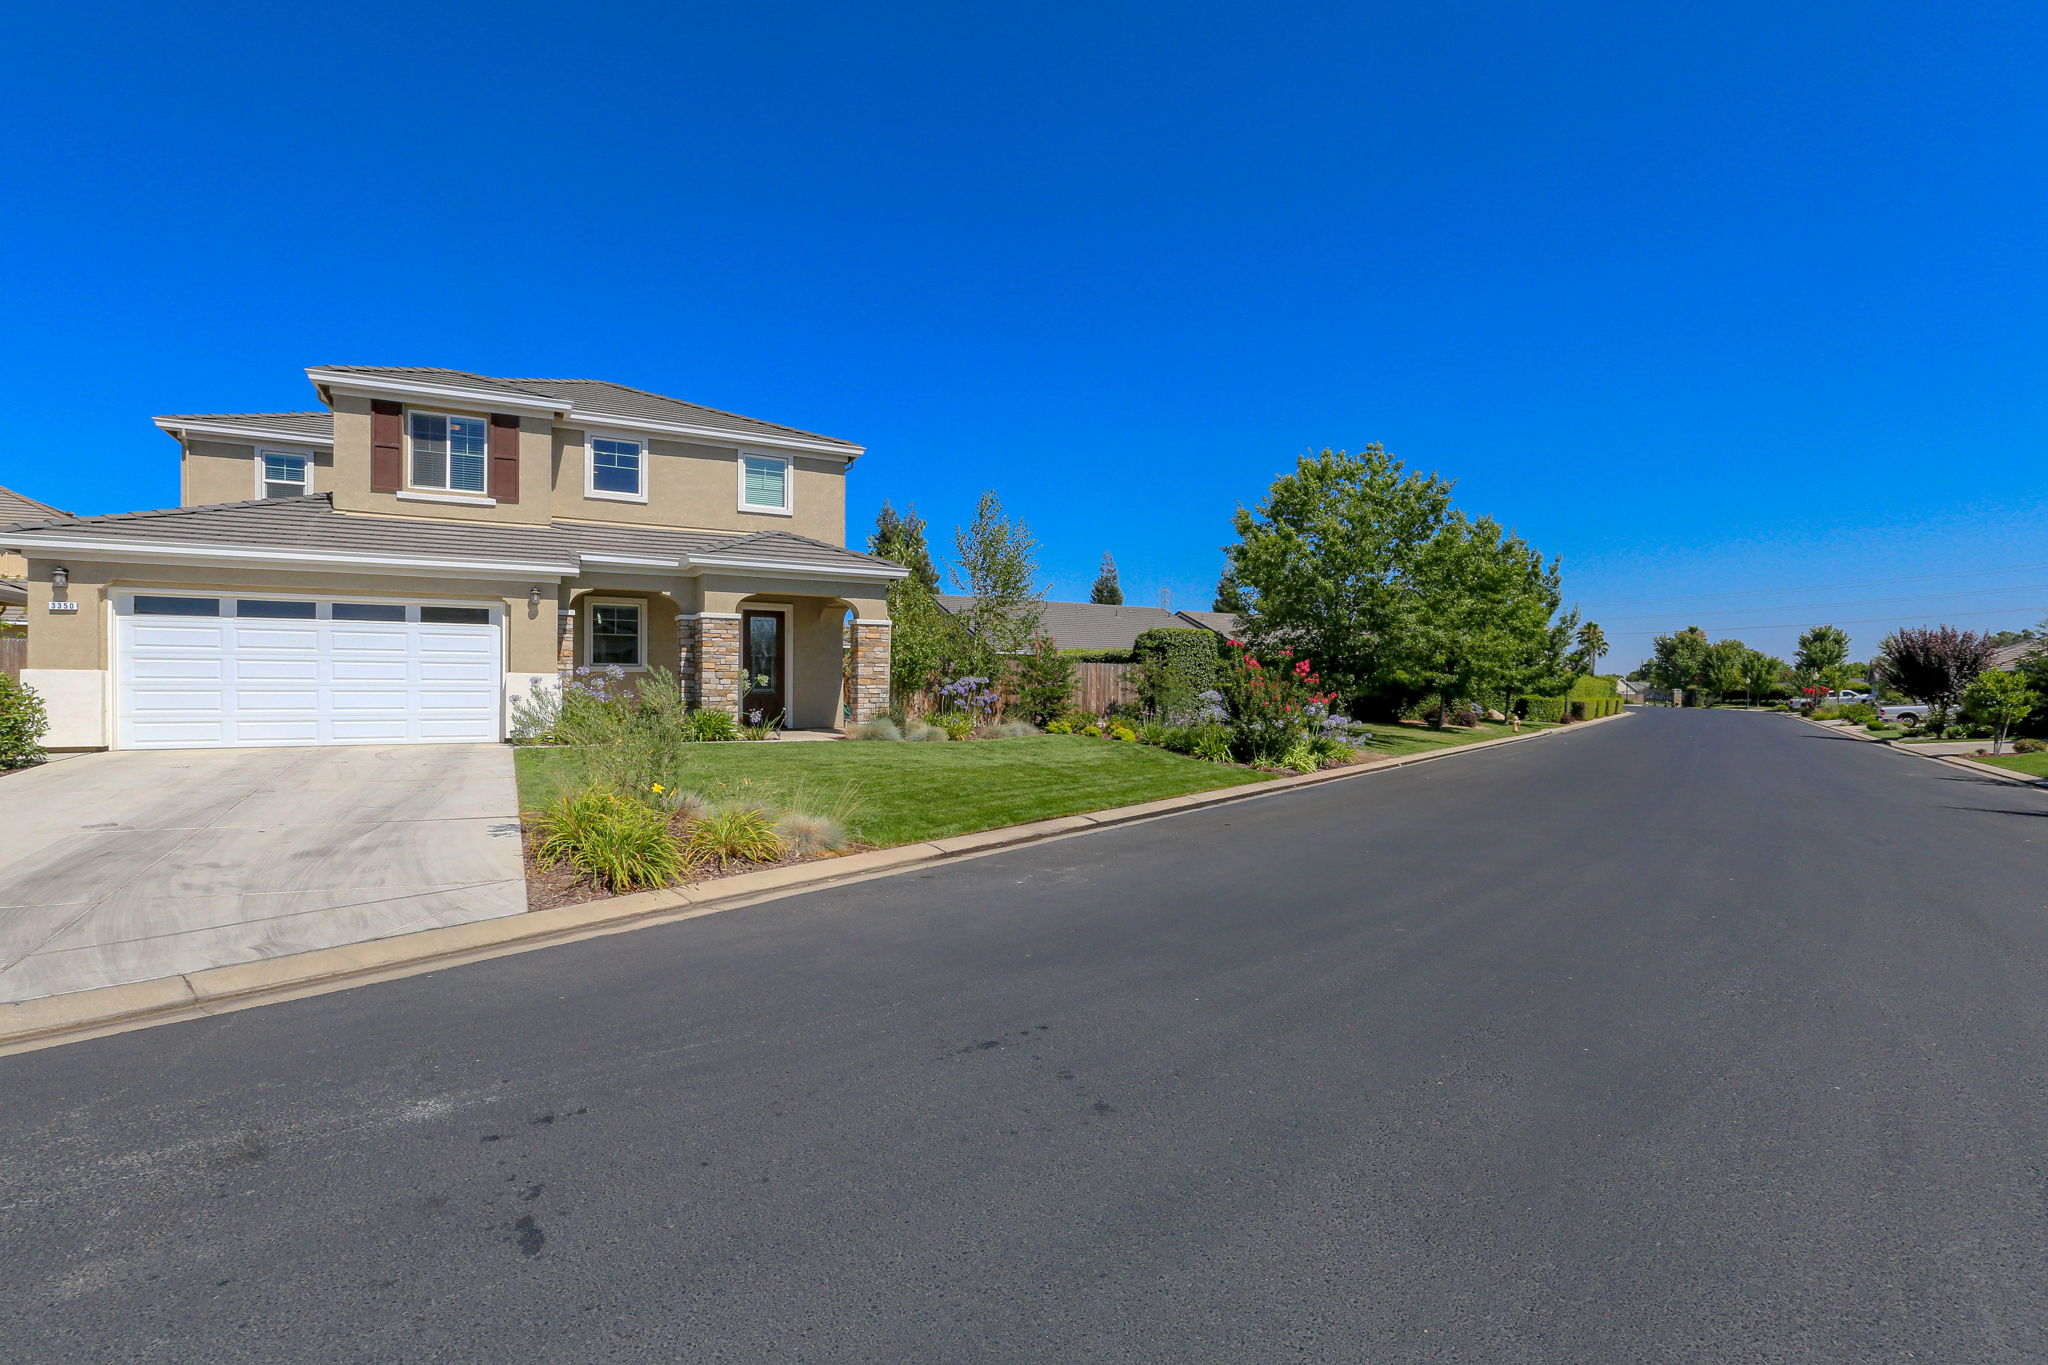  3350 Carriage Ln, Atwater, CA 95301, US Photo 2